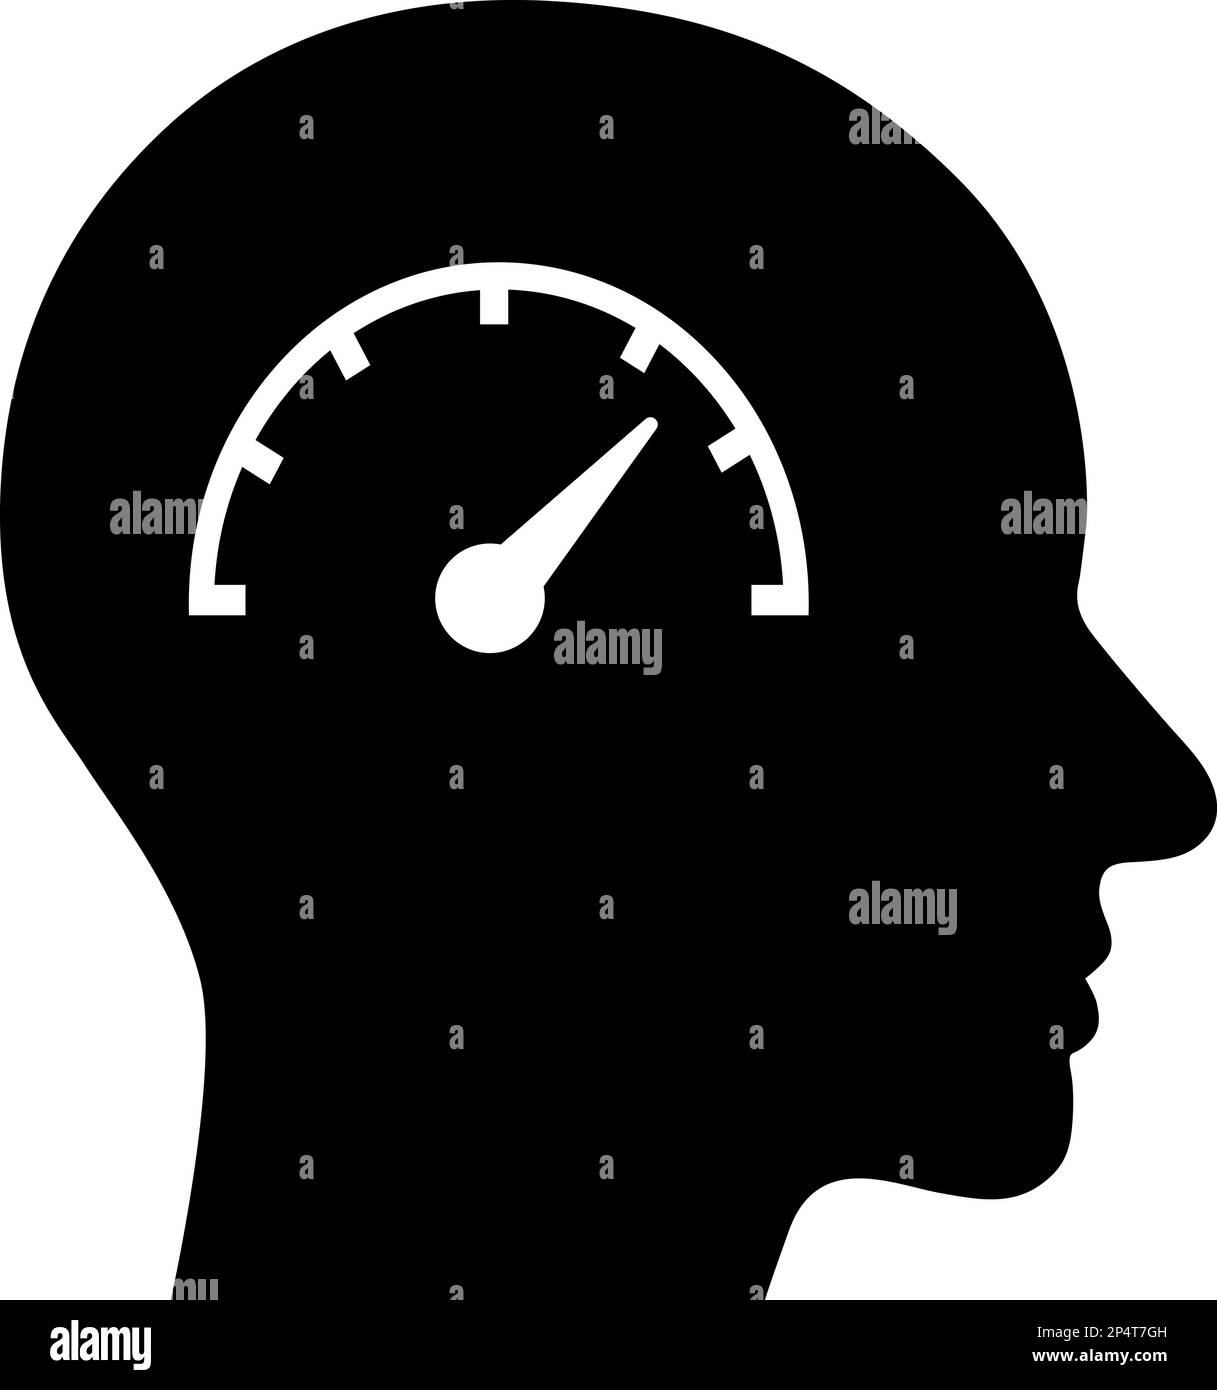 Flat icon of speedometer in human head as a concept of regulating skills and capabilities Stock Vector